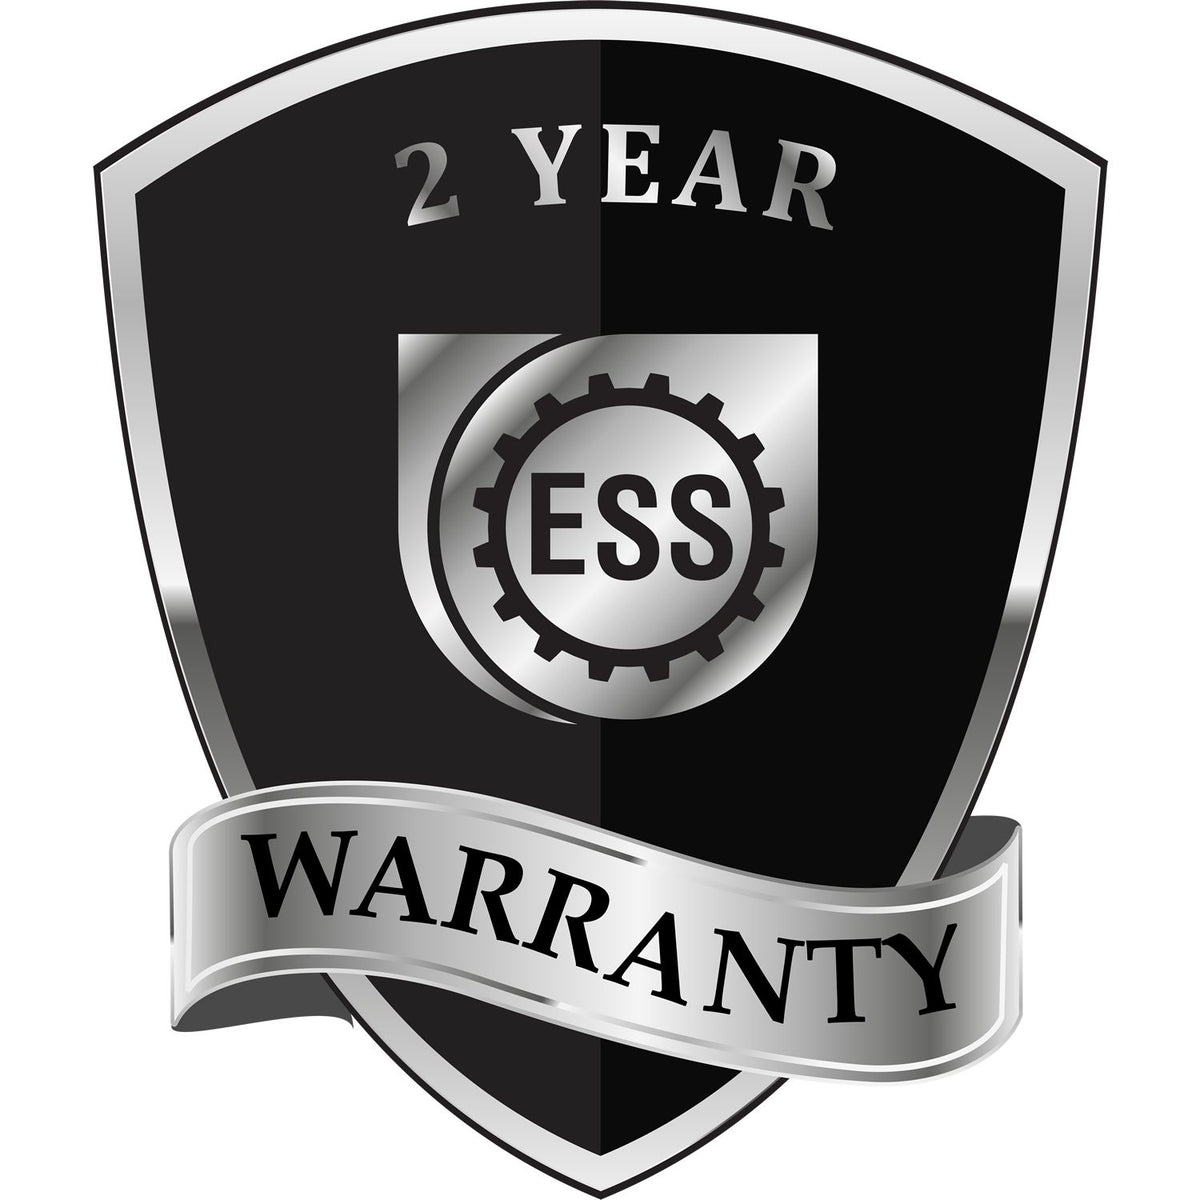 A black and silver badge or emblem showing warranty information for the Hybrid Tennessee Engineer Seal